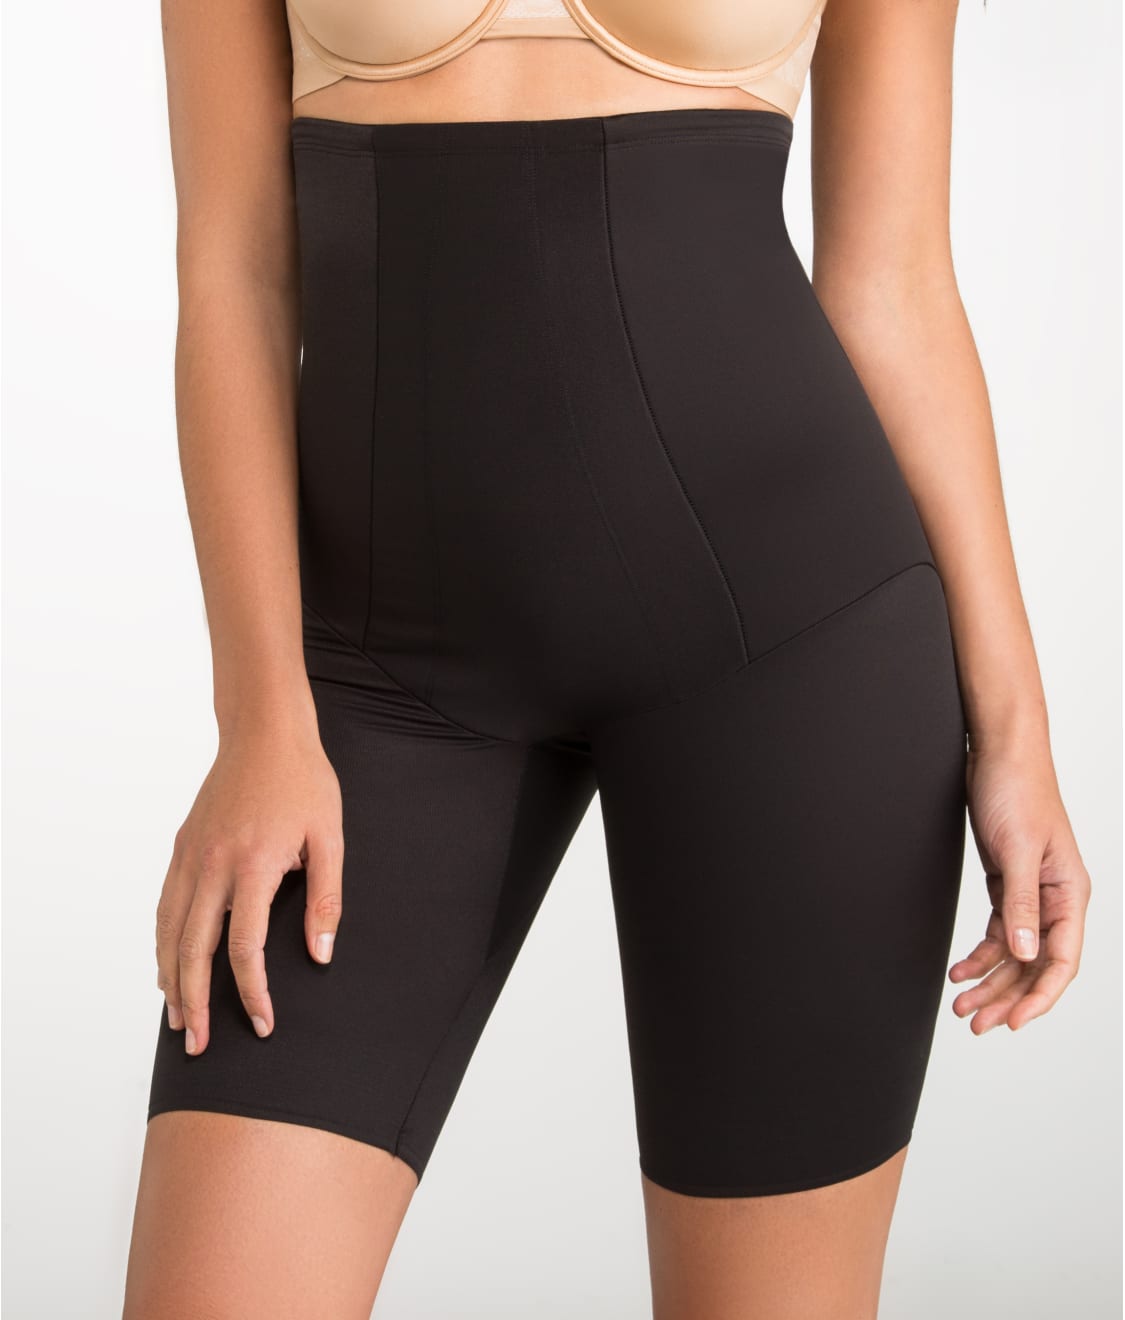 Miraclesuit: Extra Firm Control High-Waist Thigh Slimmer 2709